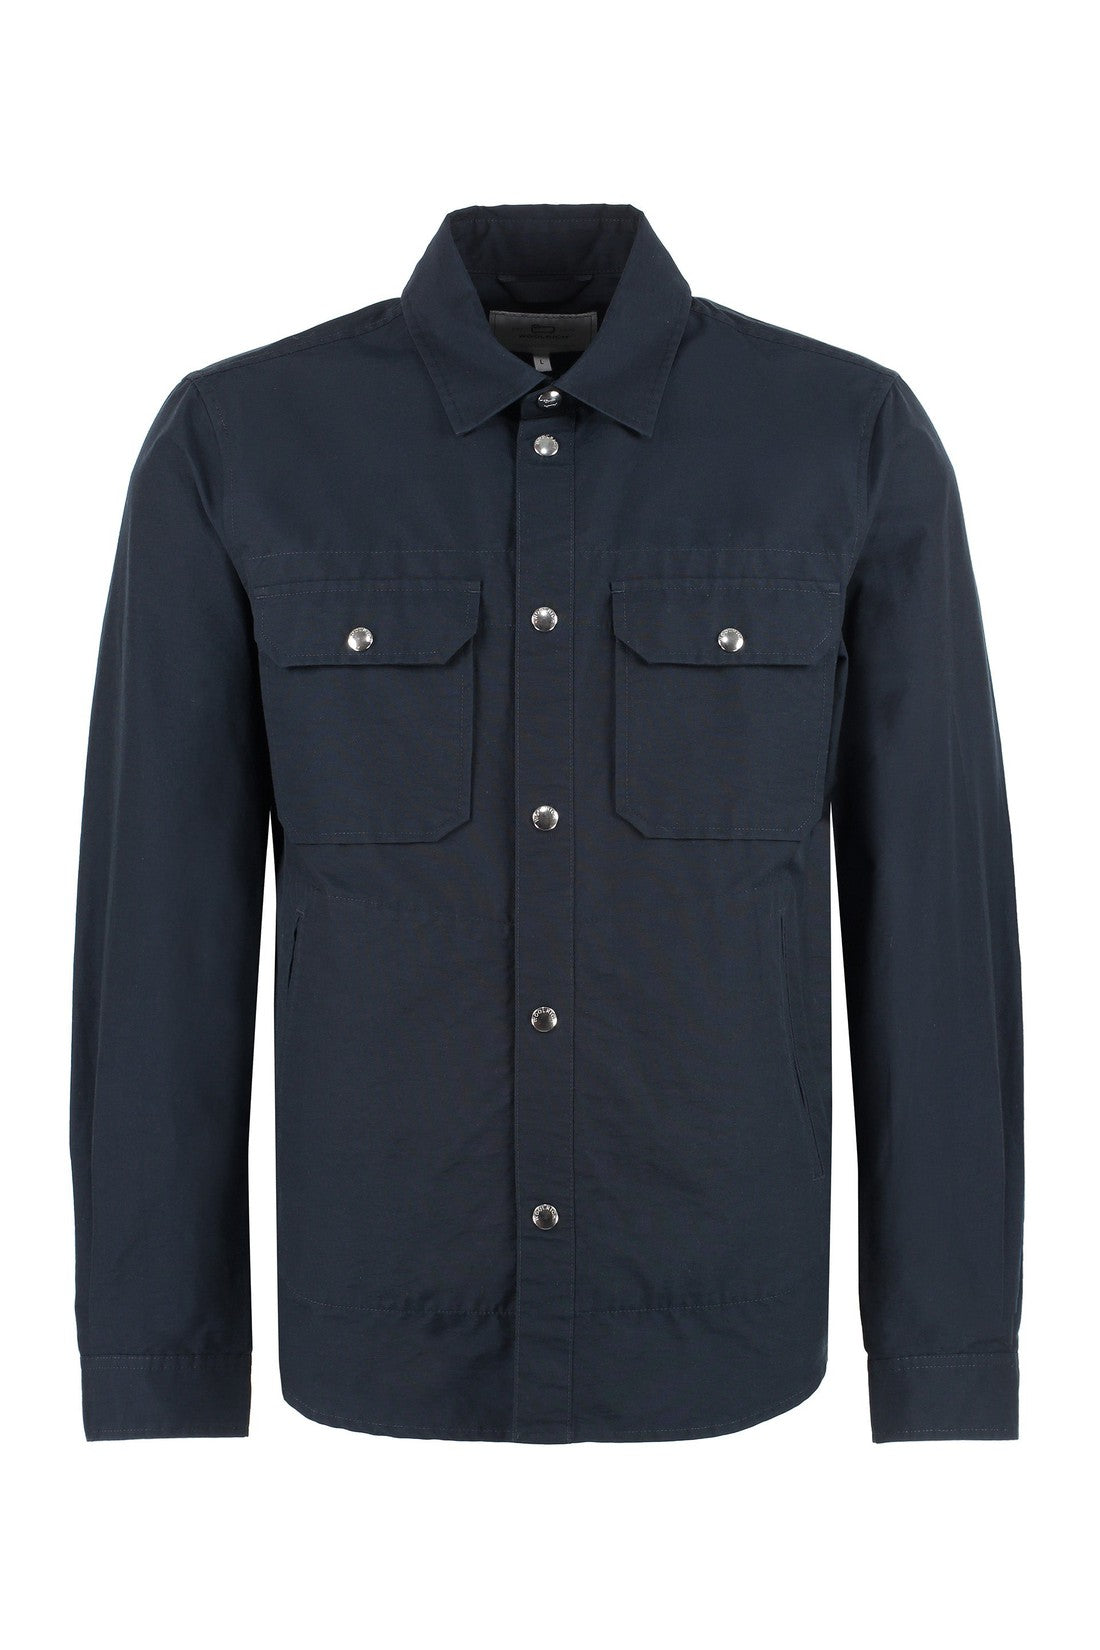 Woolrich-OUTLET-SALE-Technical fabric overshirt-ARCHIVIST